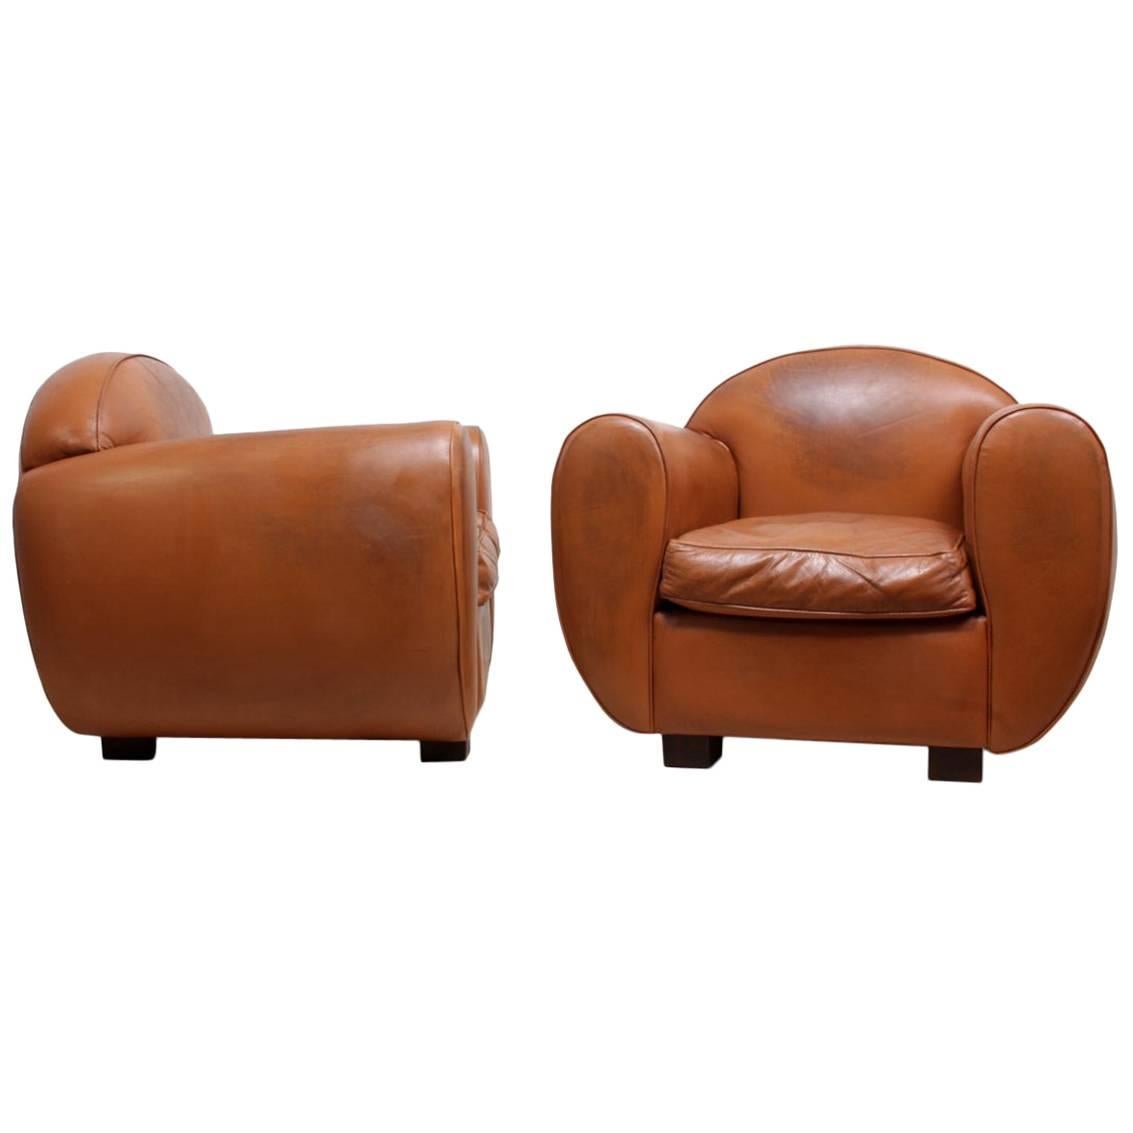 Pair of Art Deco Style Leather Club Chairs